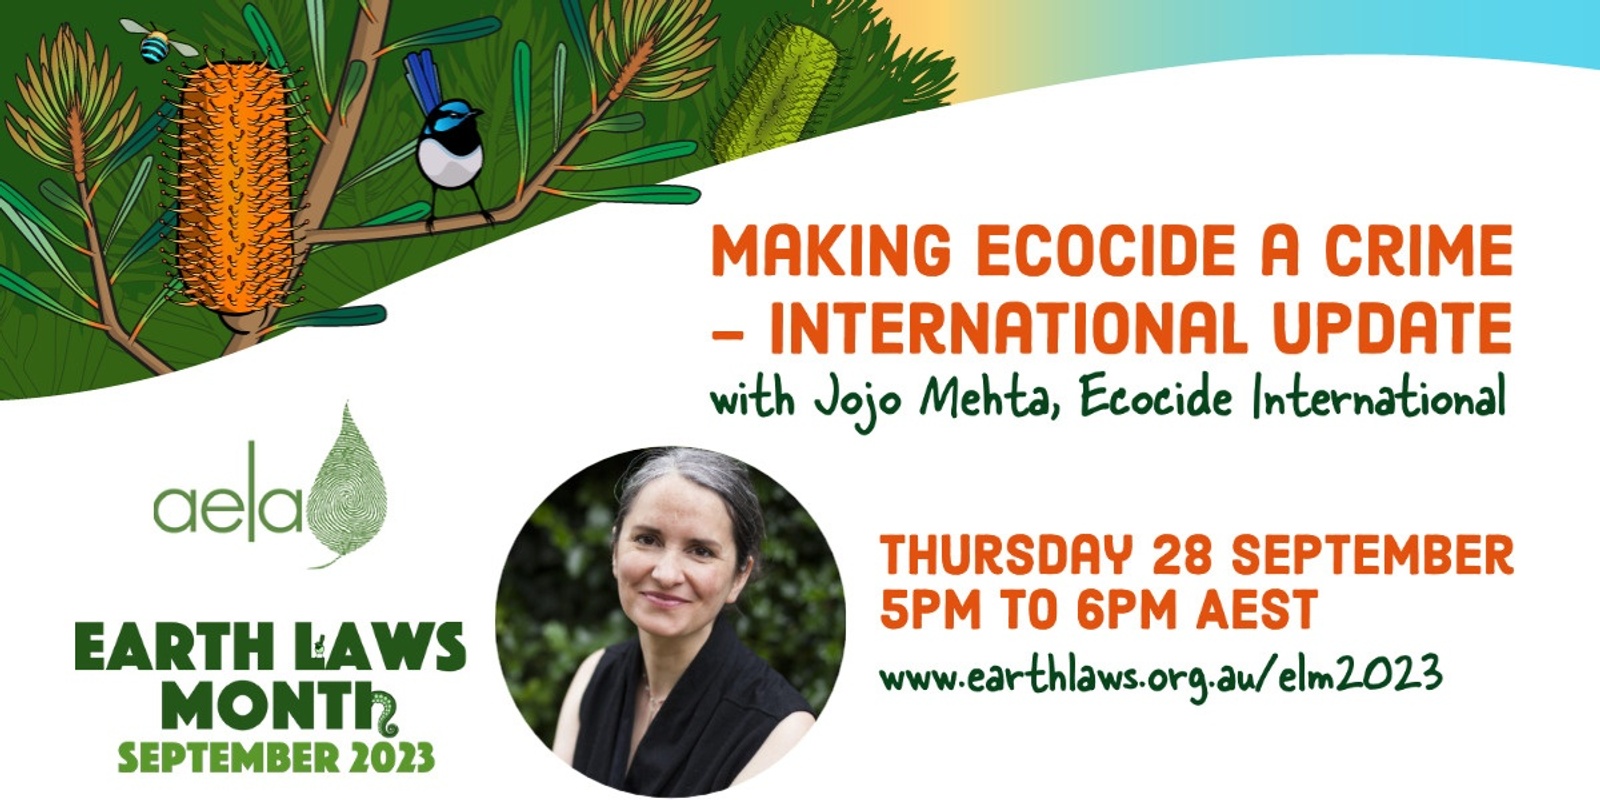 Banner image for Making ecocide a crime - international update with Jojo Mehta, Ecocide International